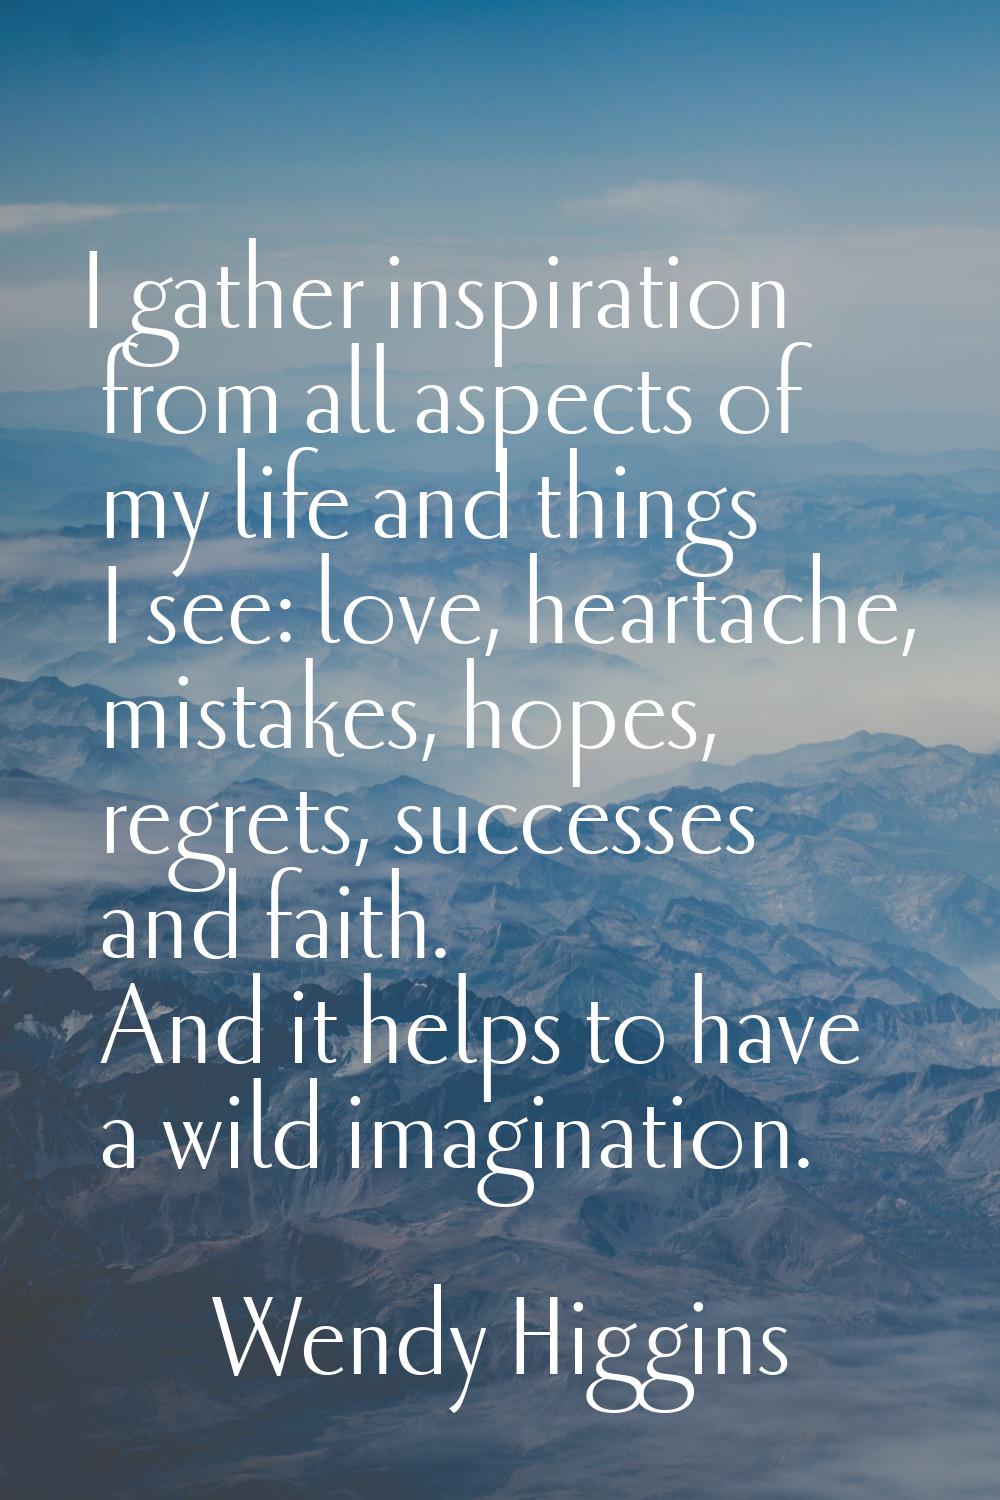 I gather inspiration from all aspects of my life and things I see: love, heartache, mistakes, hopes